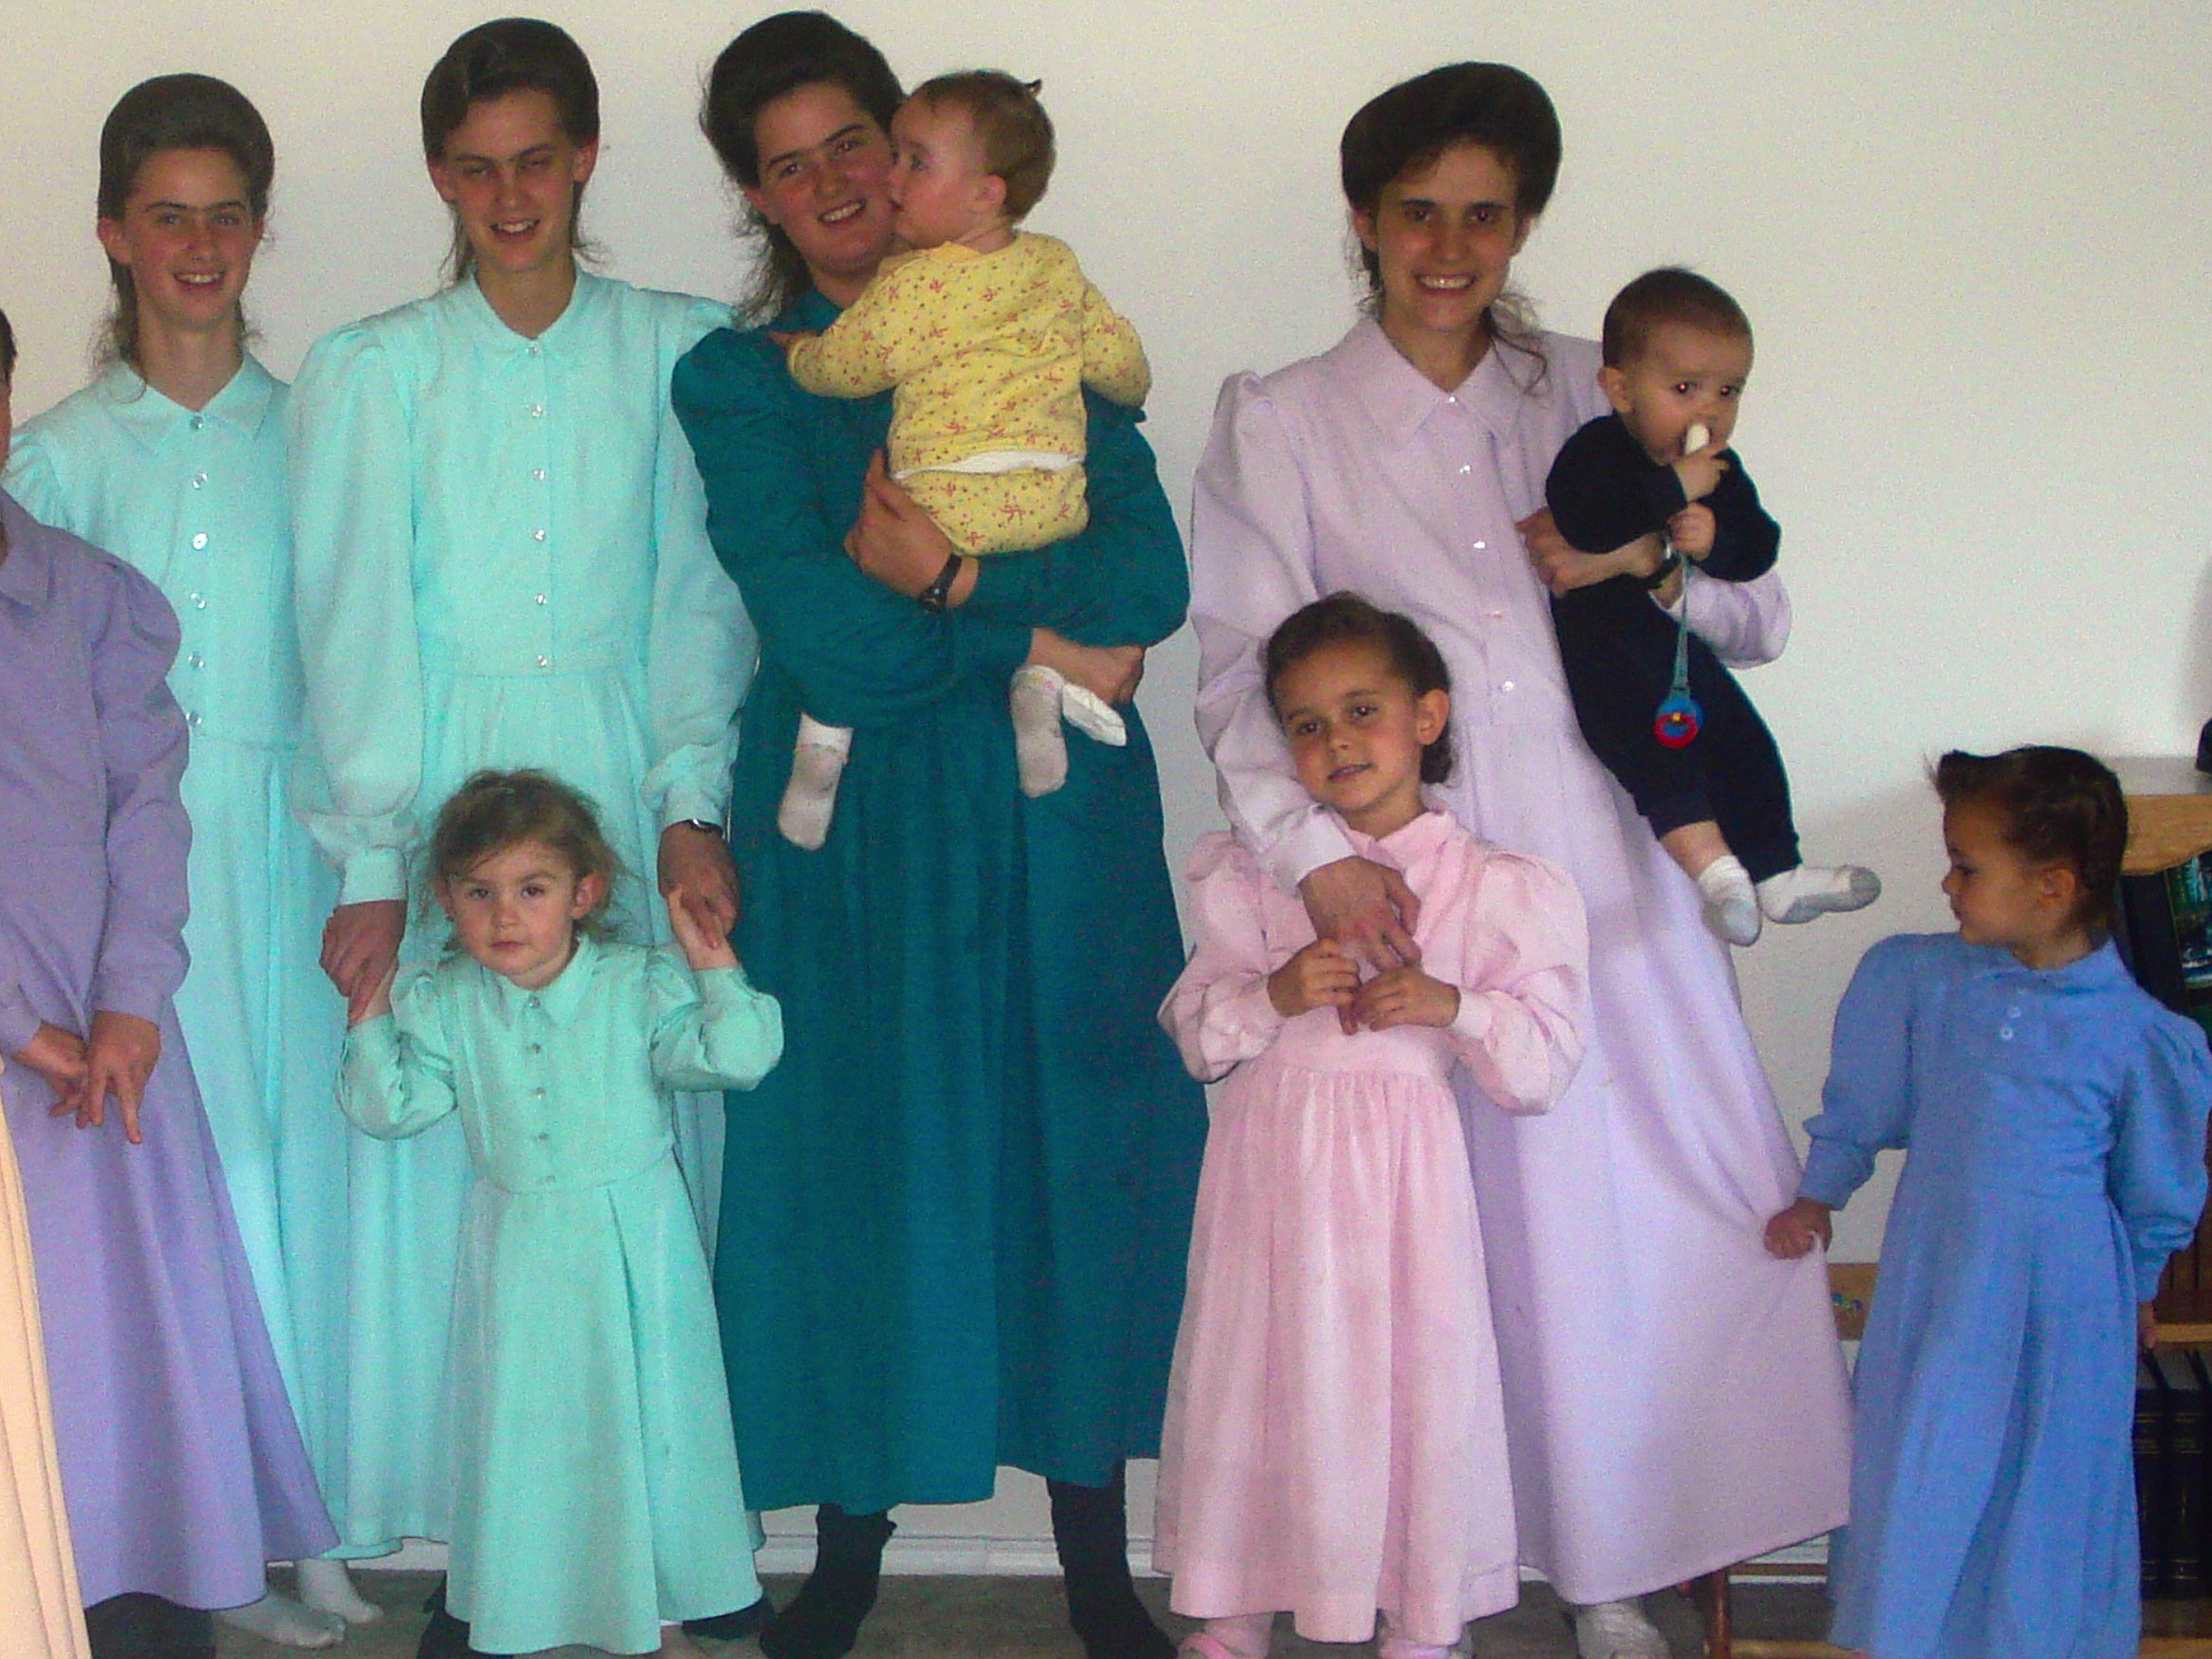 Keep Sweet: Pray and Obey is a new Netflix documentary about the FLDS